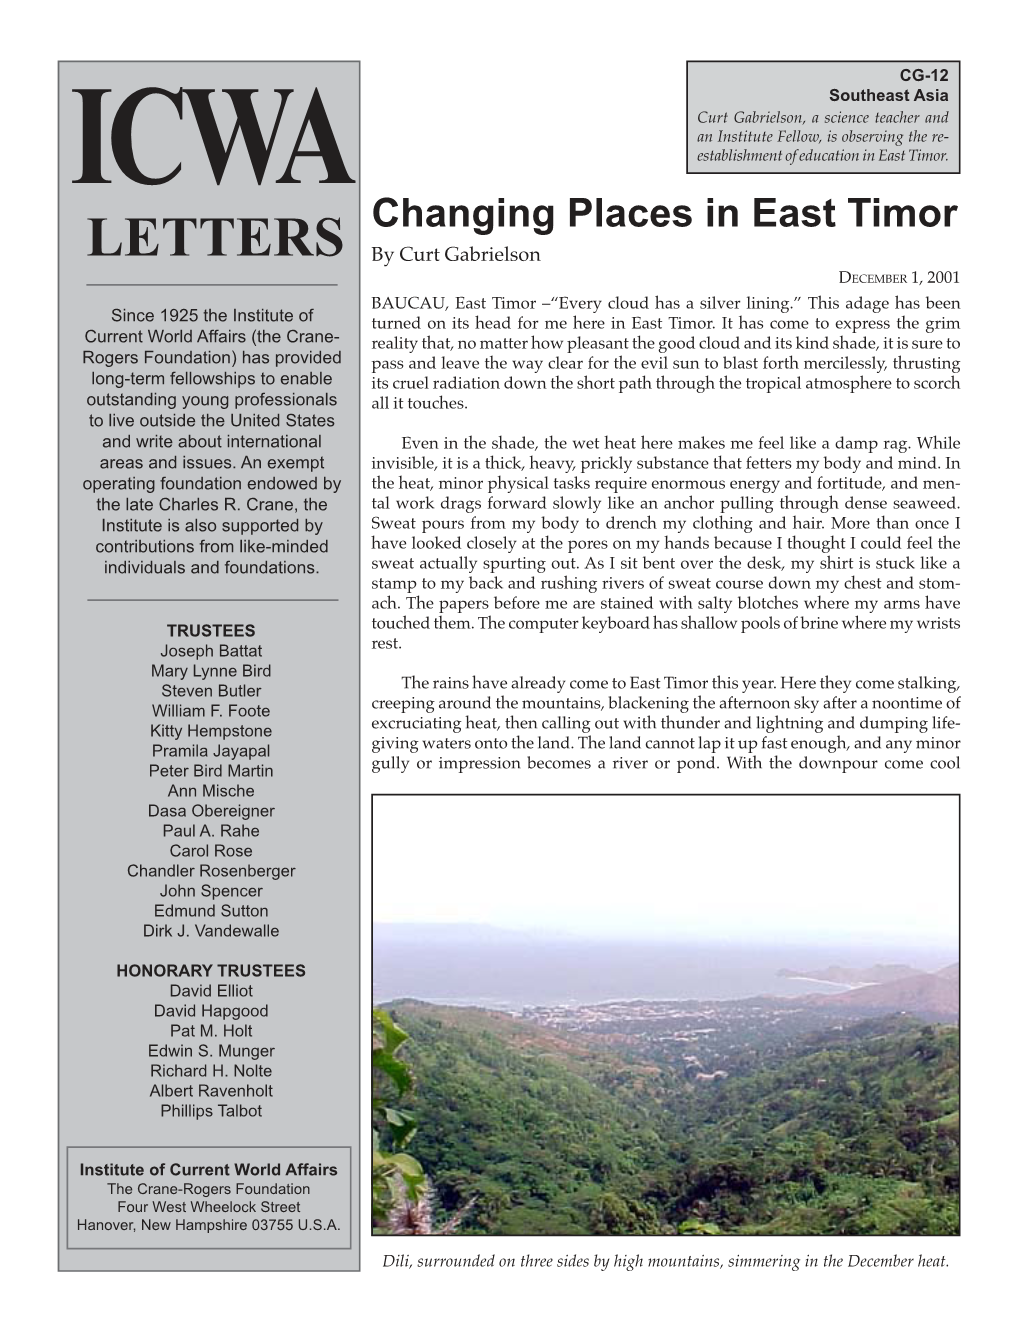 Changing Places in East Timor